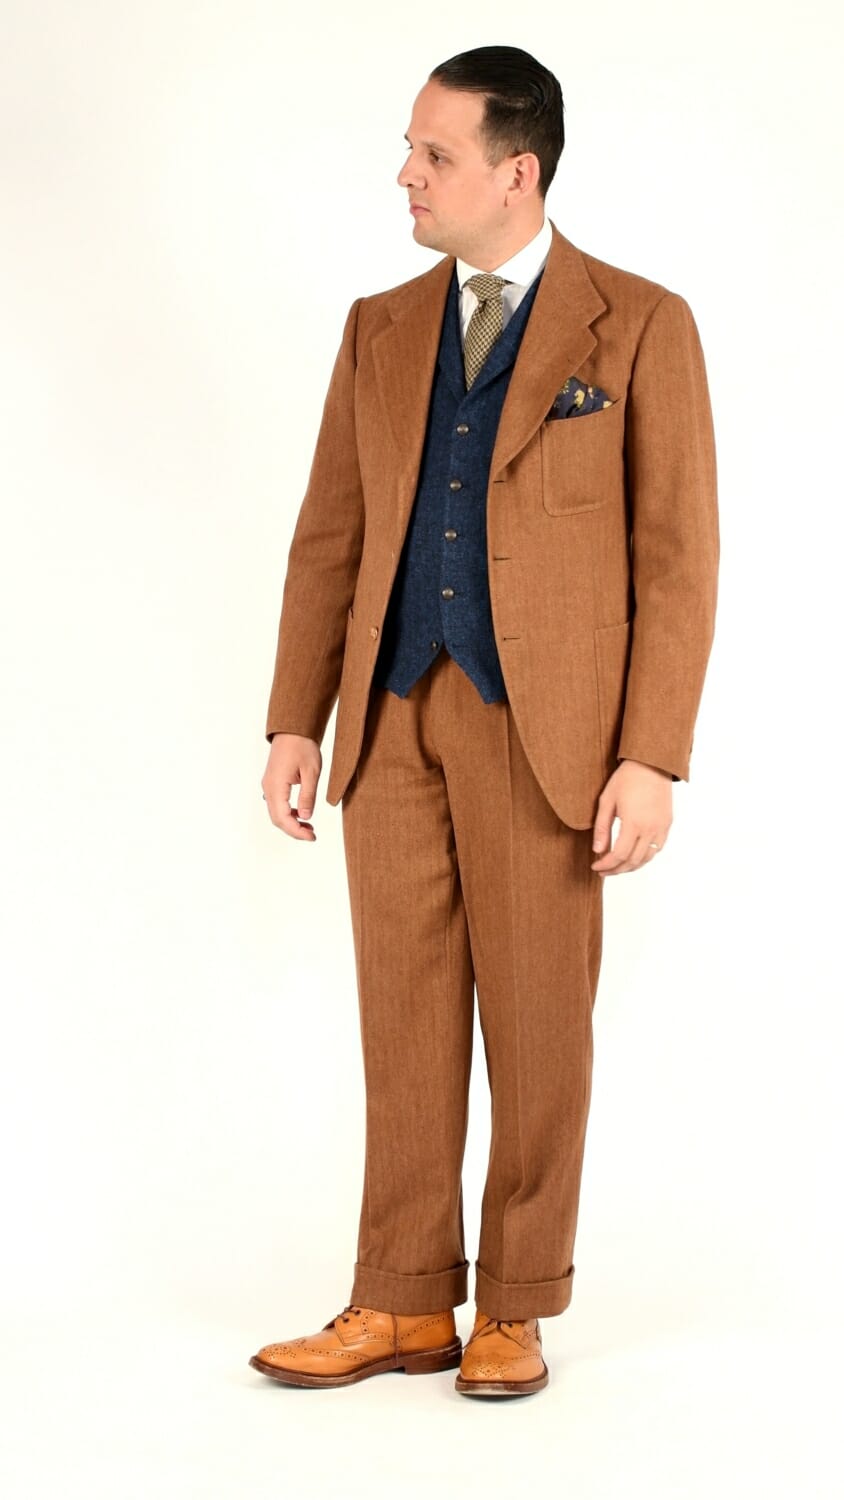 Sven Raphael Schneider wearing a rust-colored, single-breasted herringbone suit with a contrasting vest and tan full brogue boots